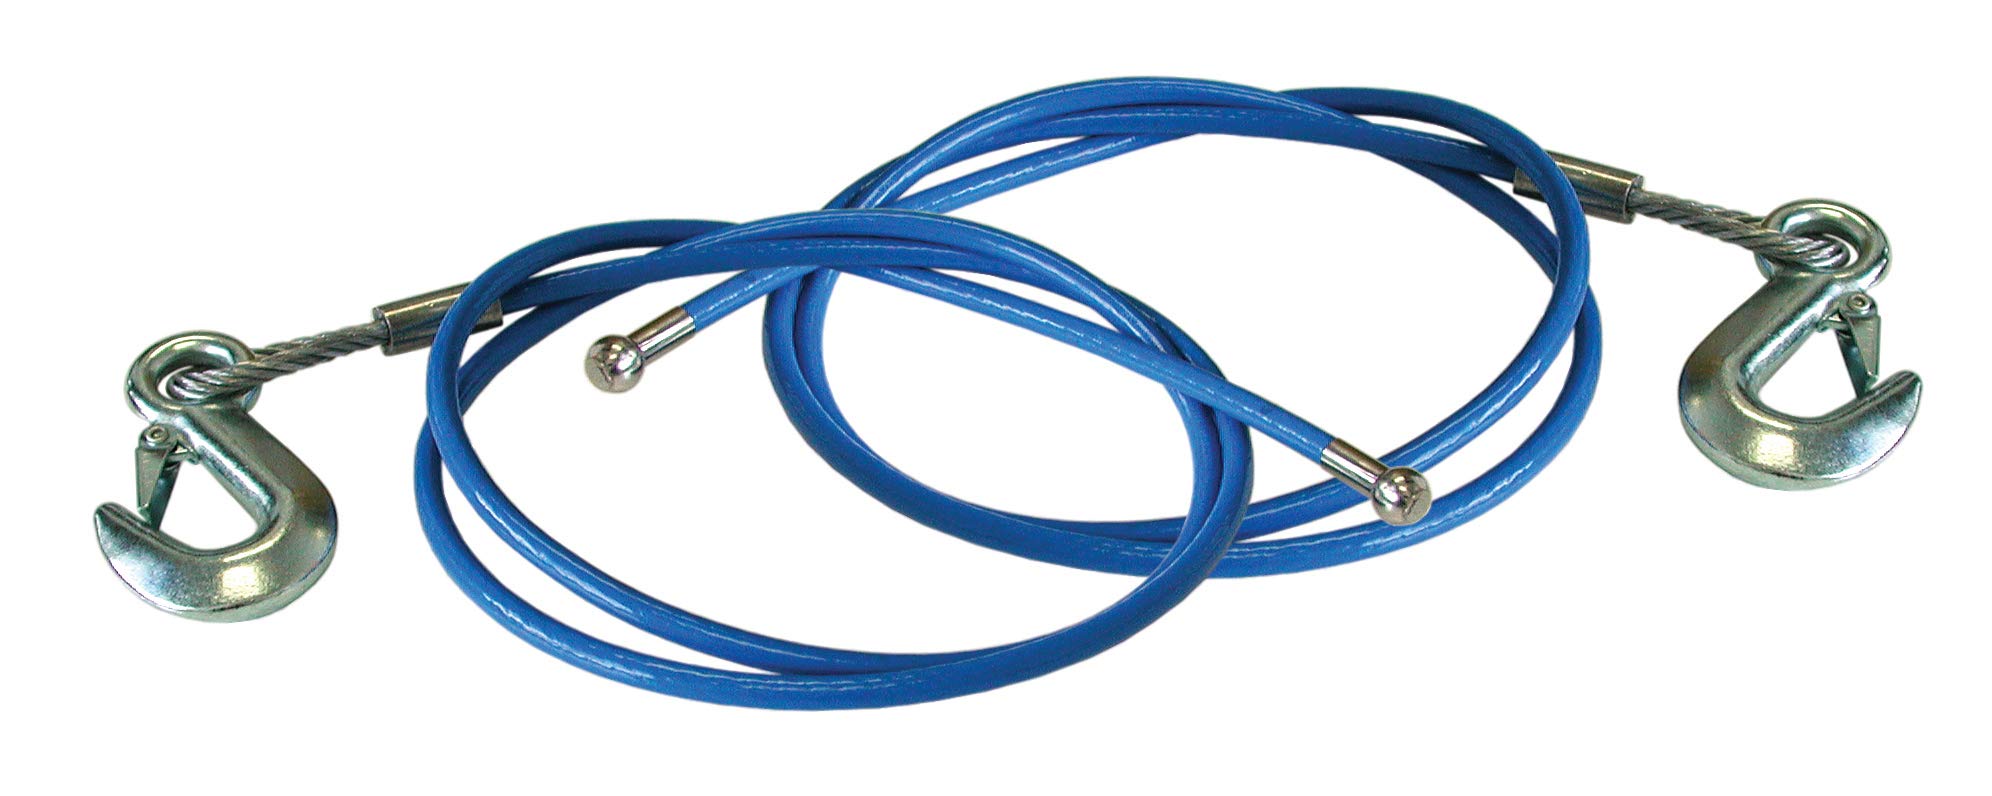 Roadmaster (655-64 Safety Cable